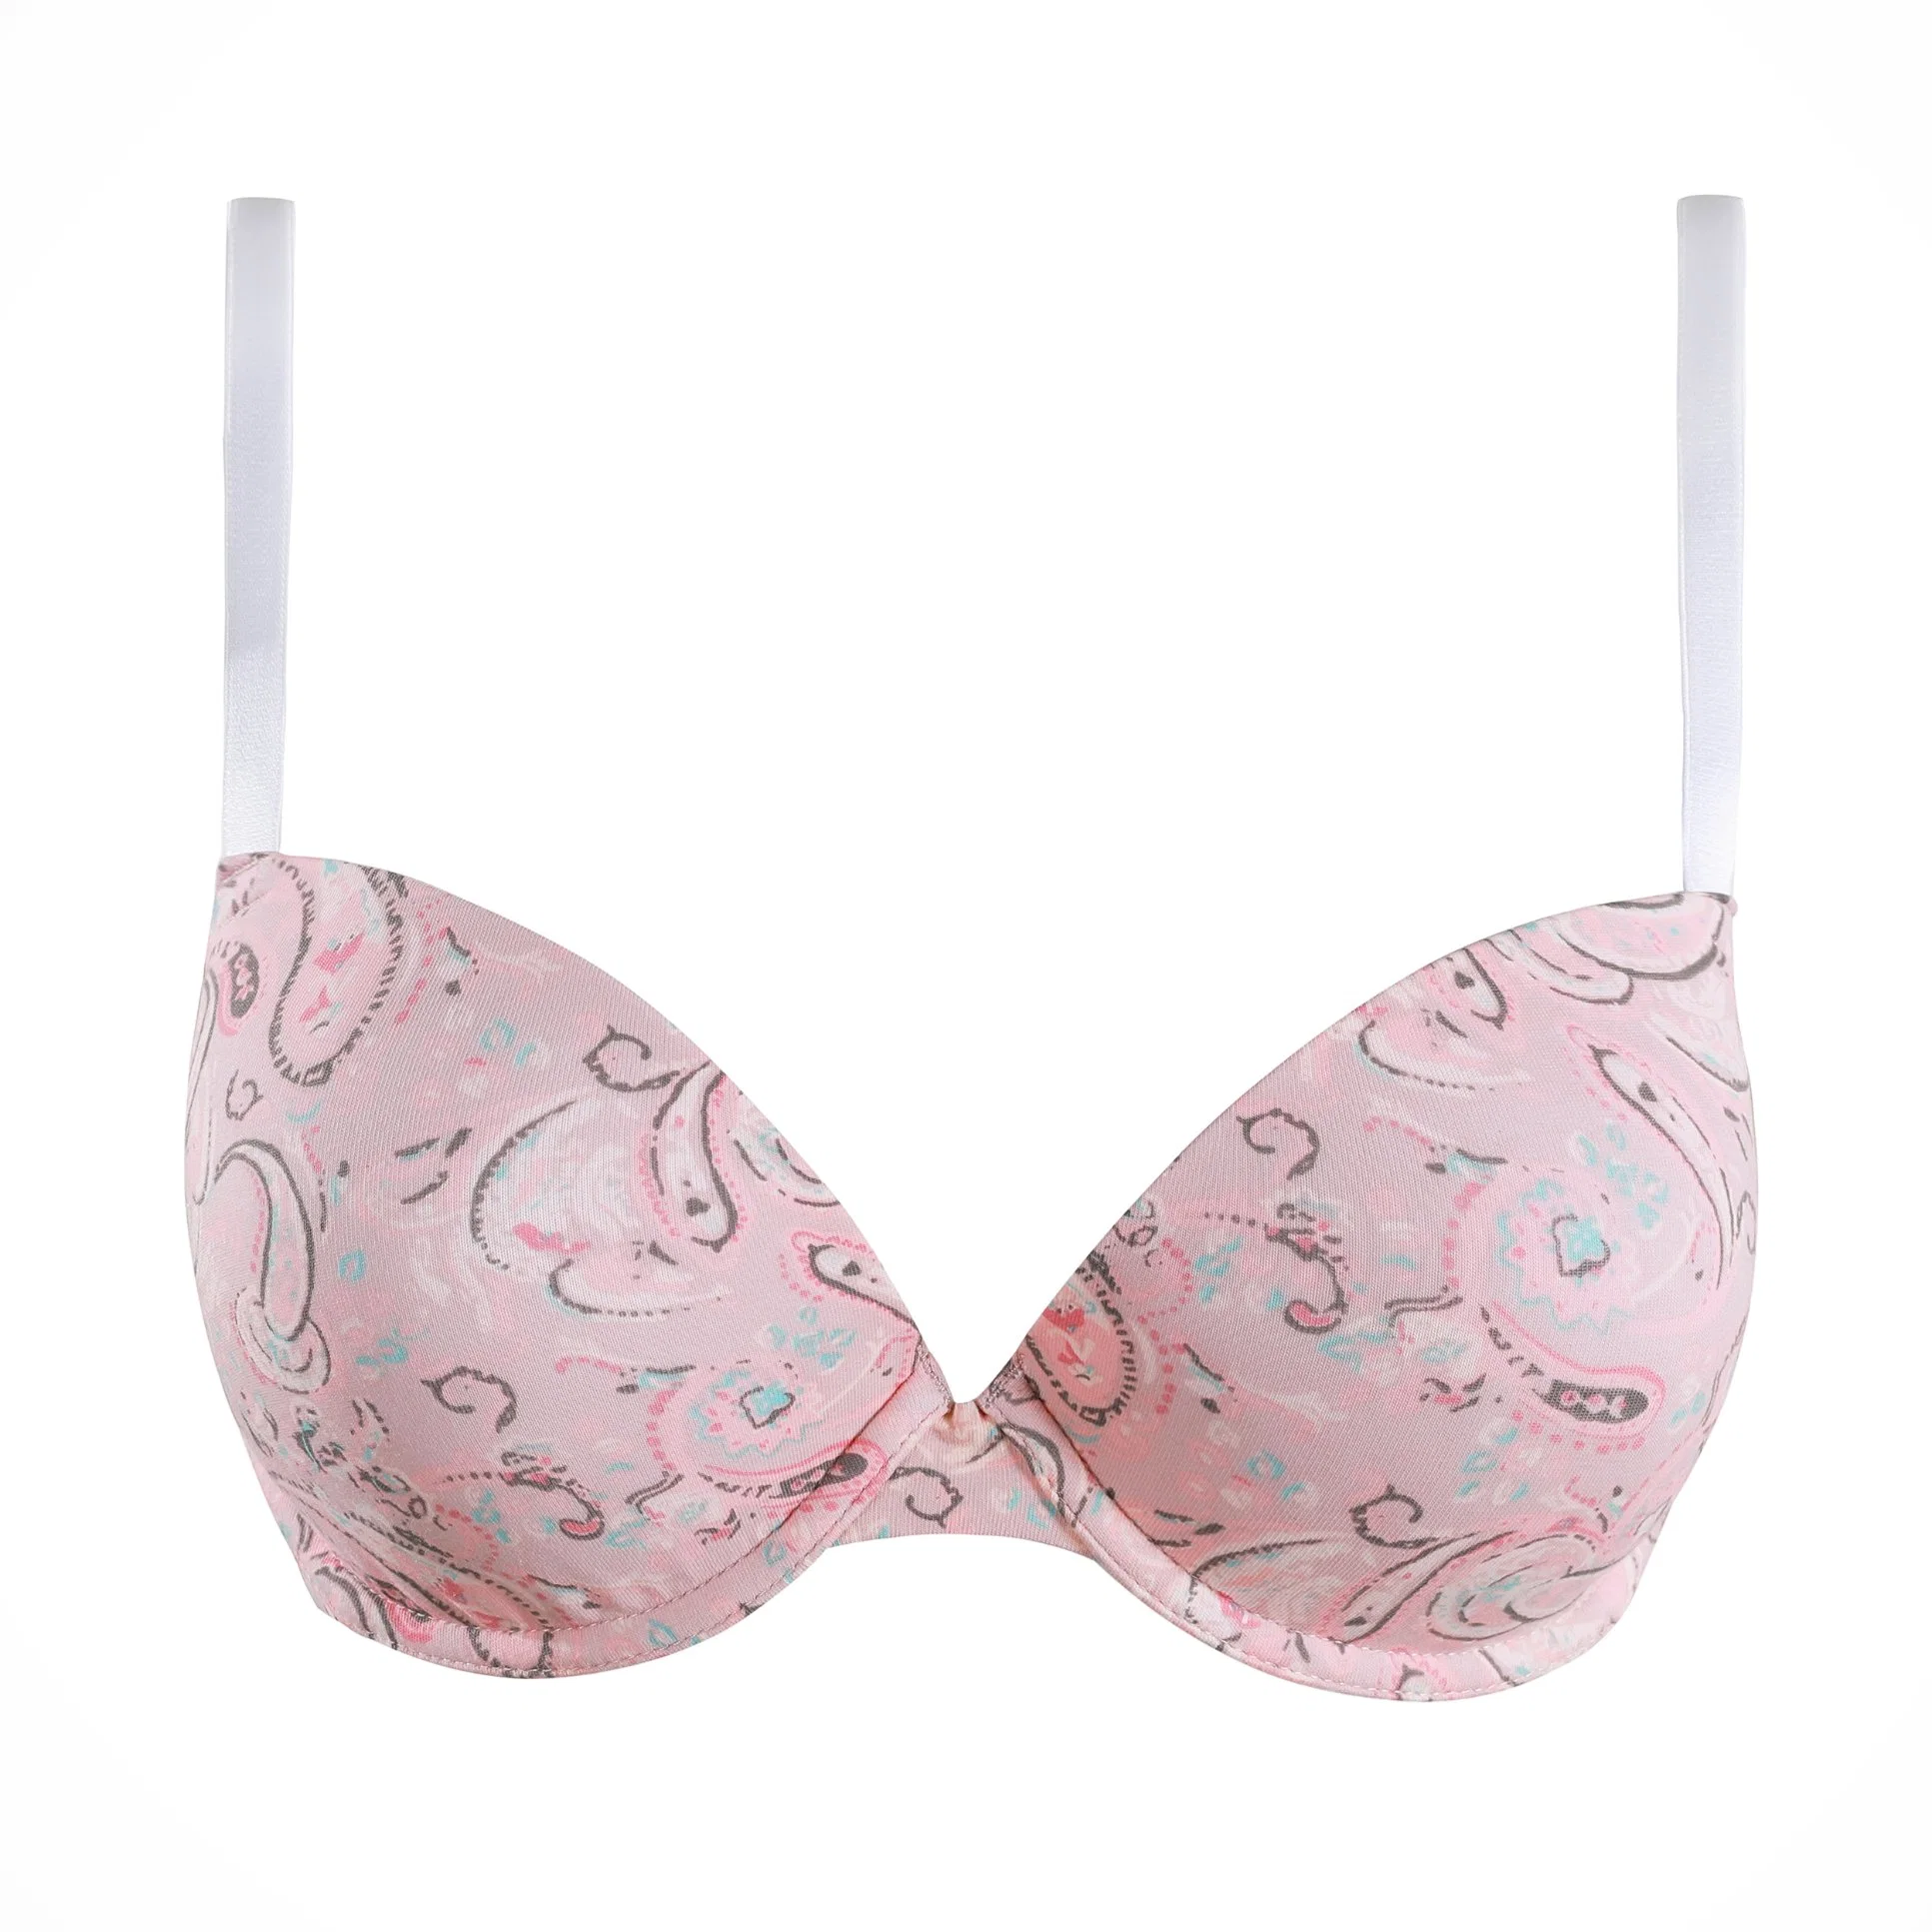 2023 New Fashion Floral Print Comfortable Organic Cotton Young Lady Wireless Mold Cup Bra